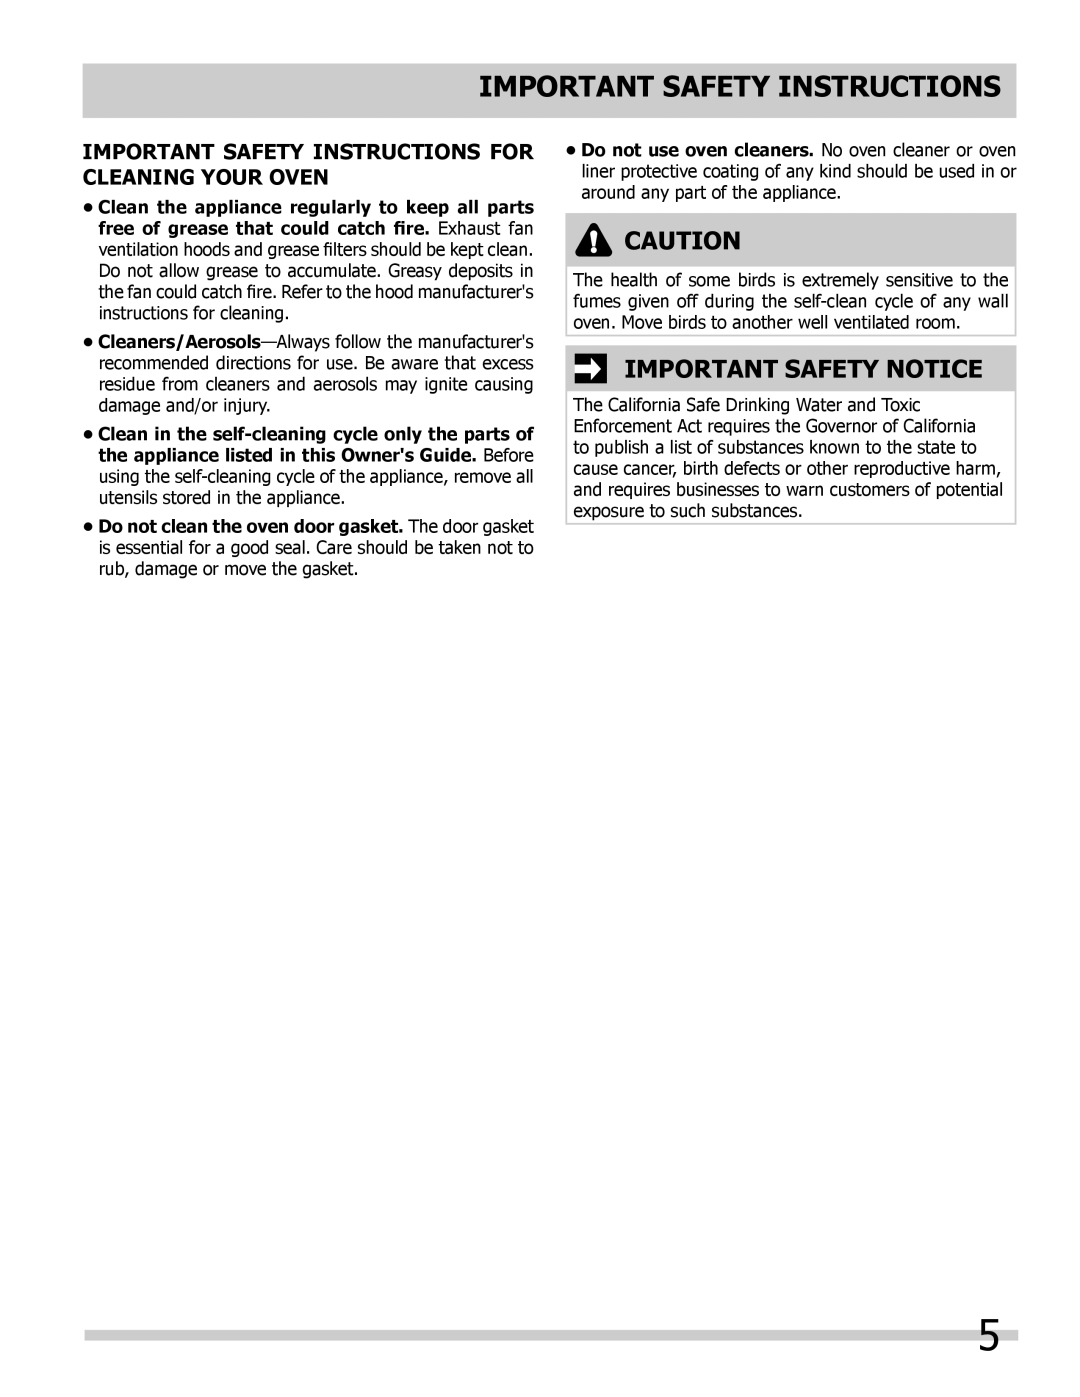 Frigidaire FGET3065KW, FPET3085KF, FPET2785KF Important Safety Notice, Important Safety Instructions For Cleaning Your Oven 